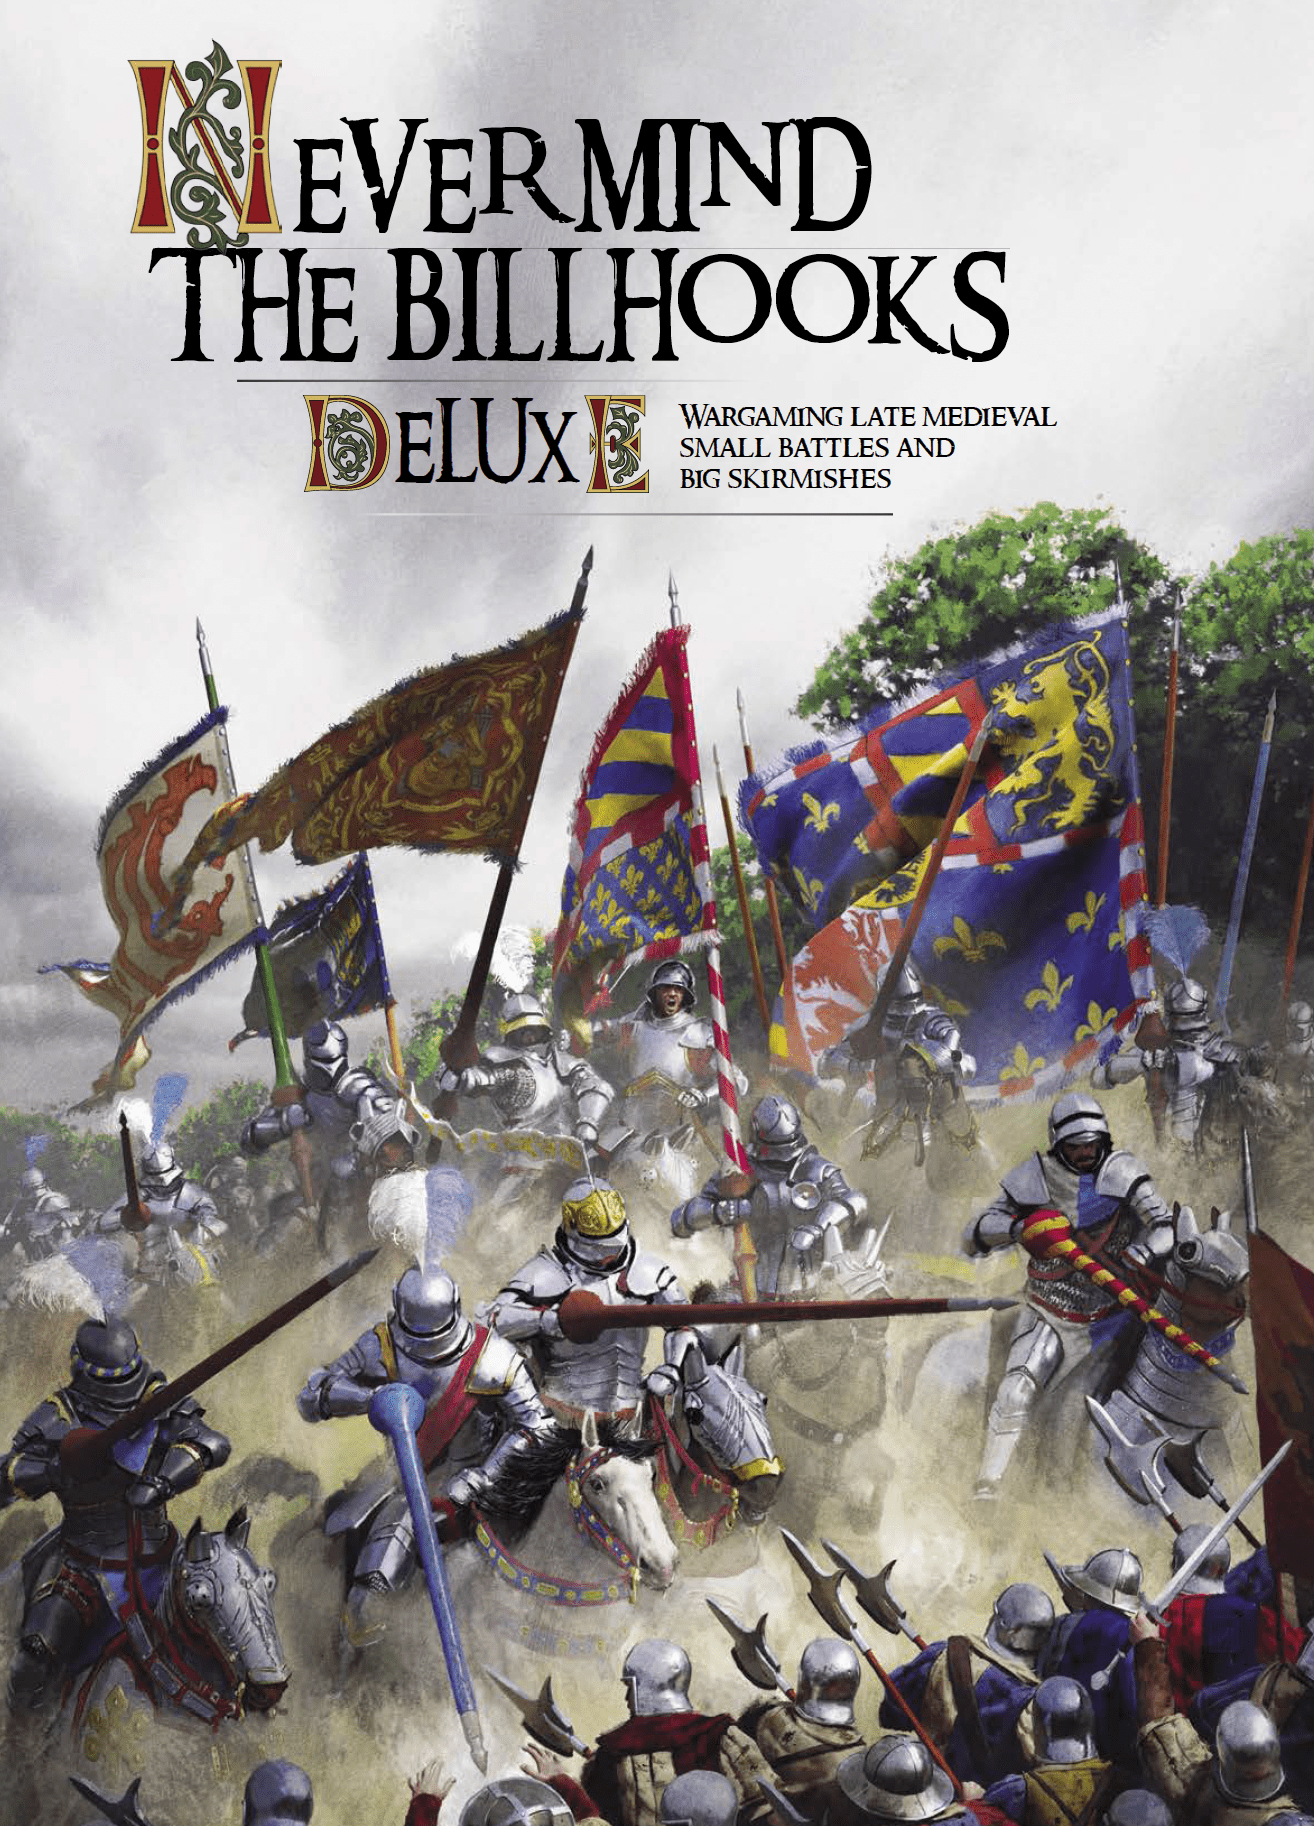 Nevermind The Billhooks Deluxe - Wargames Illustrated